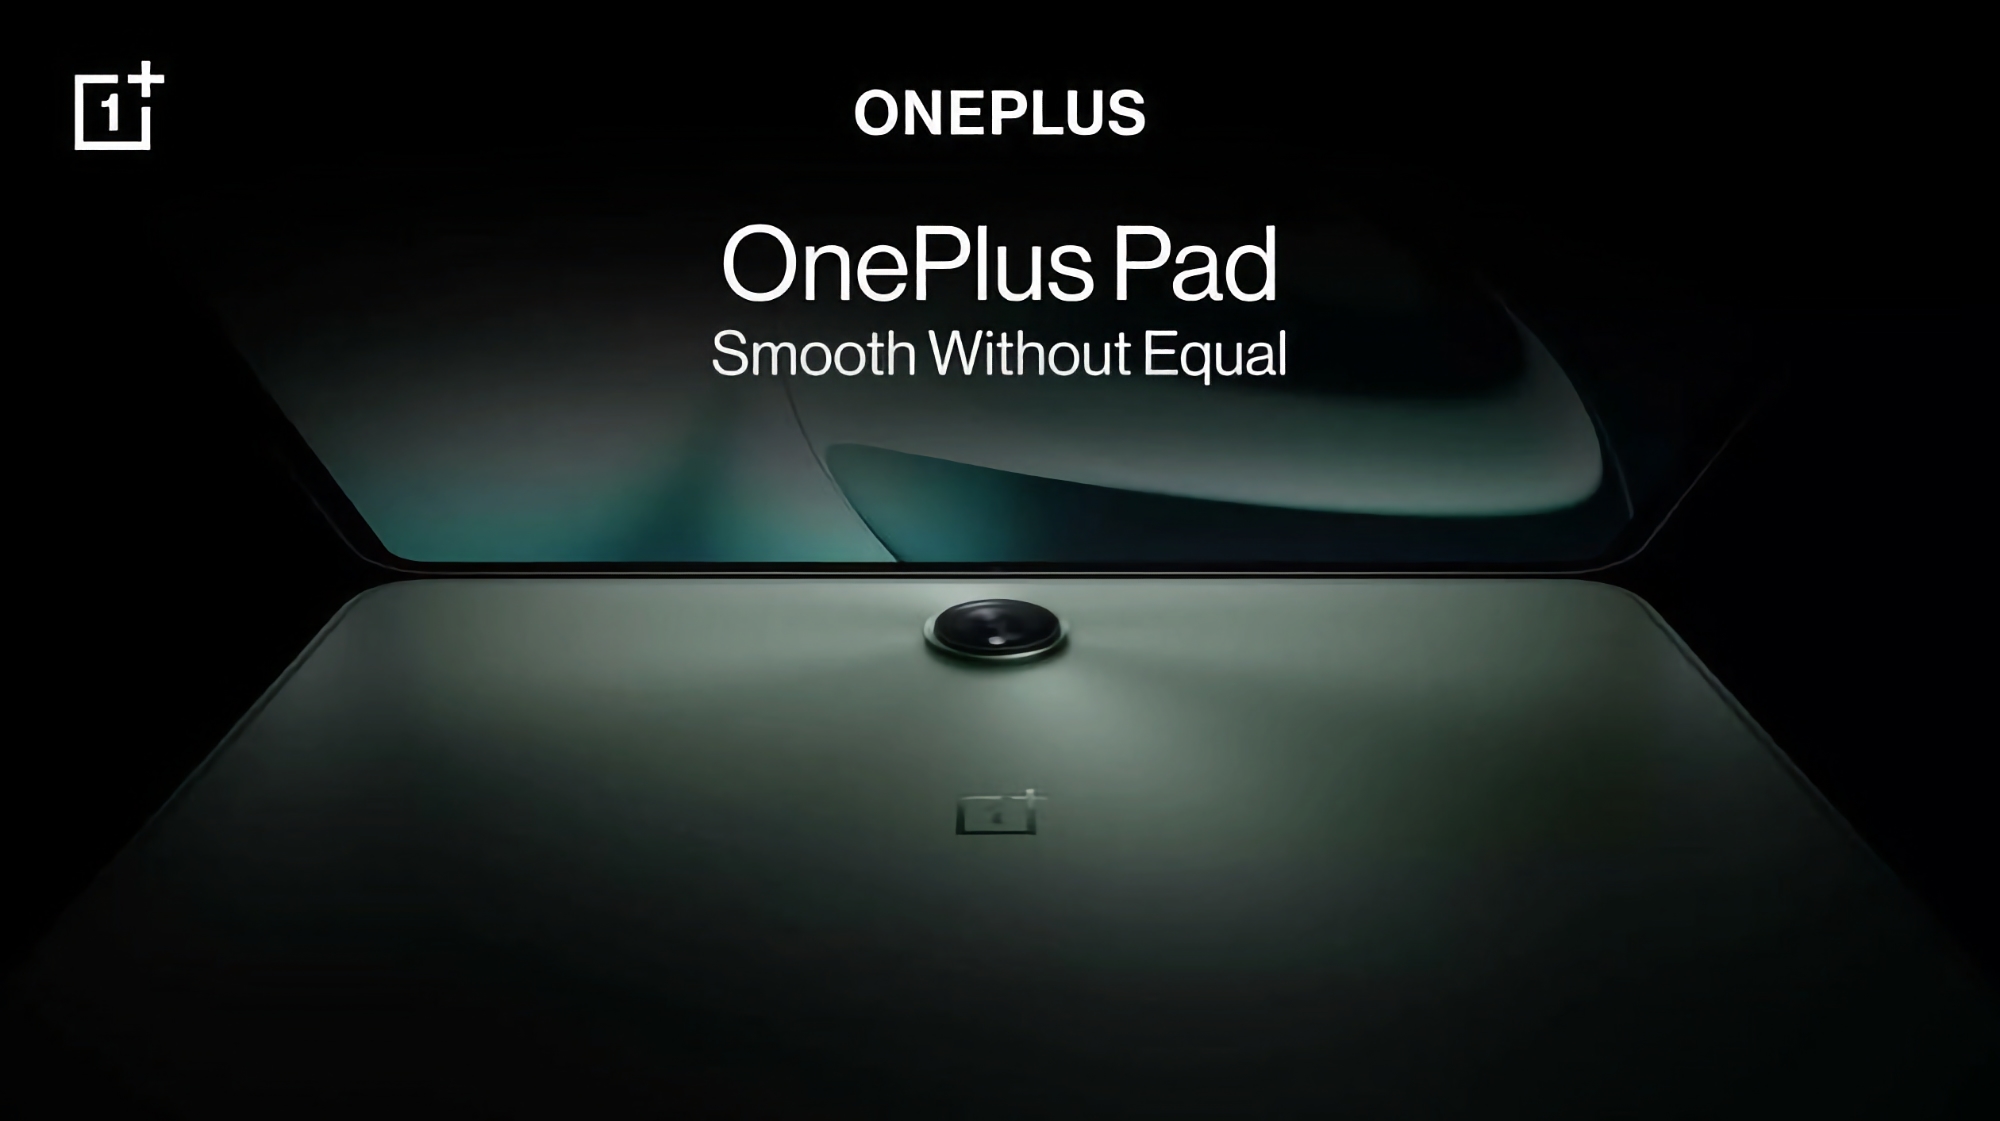 A pleasant surprise: the OnePlus Pad will come with a magnetic keyboard and stylus